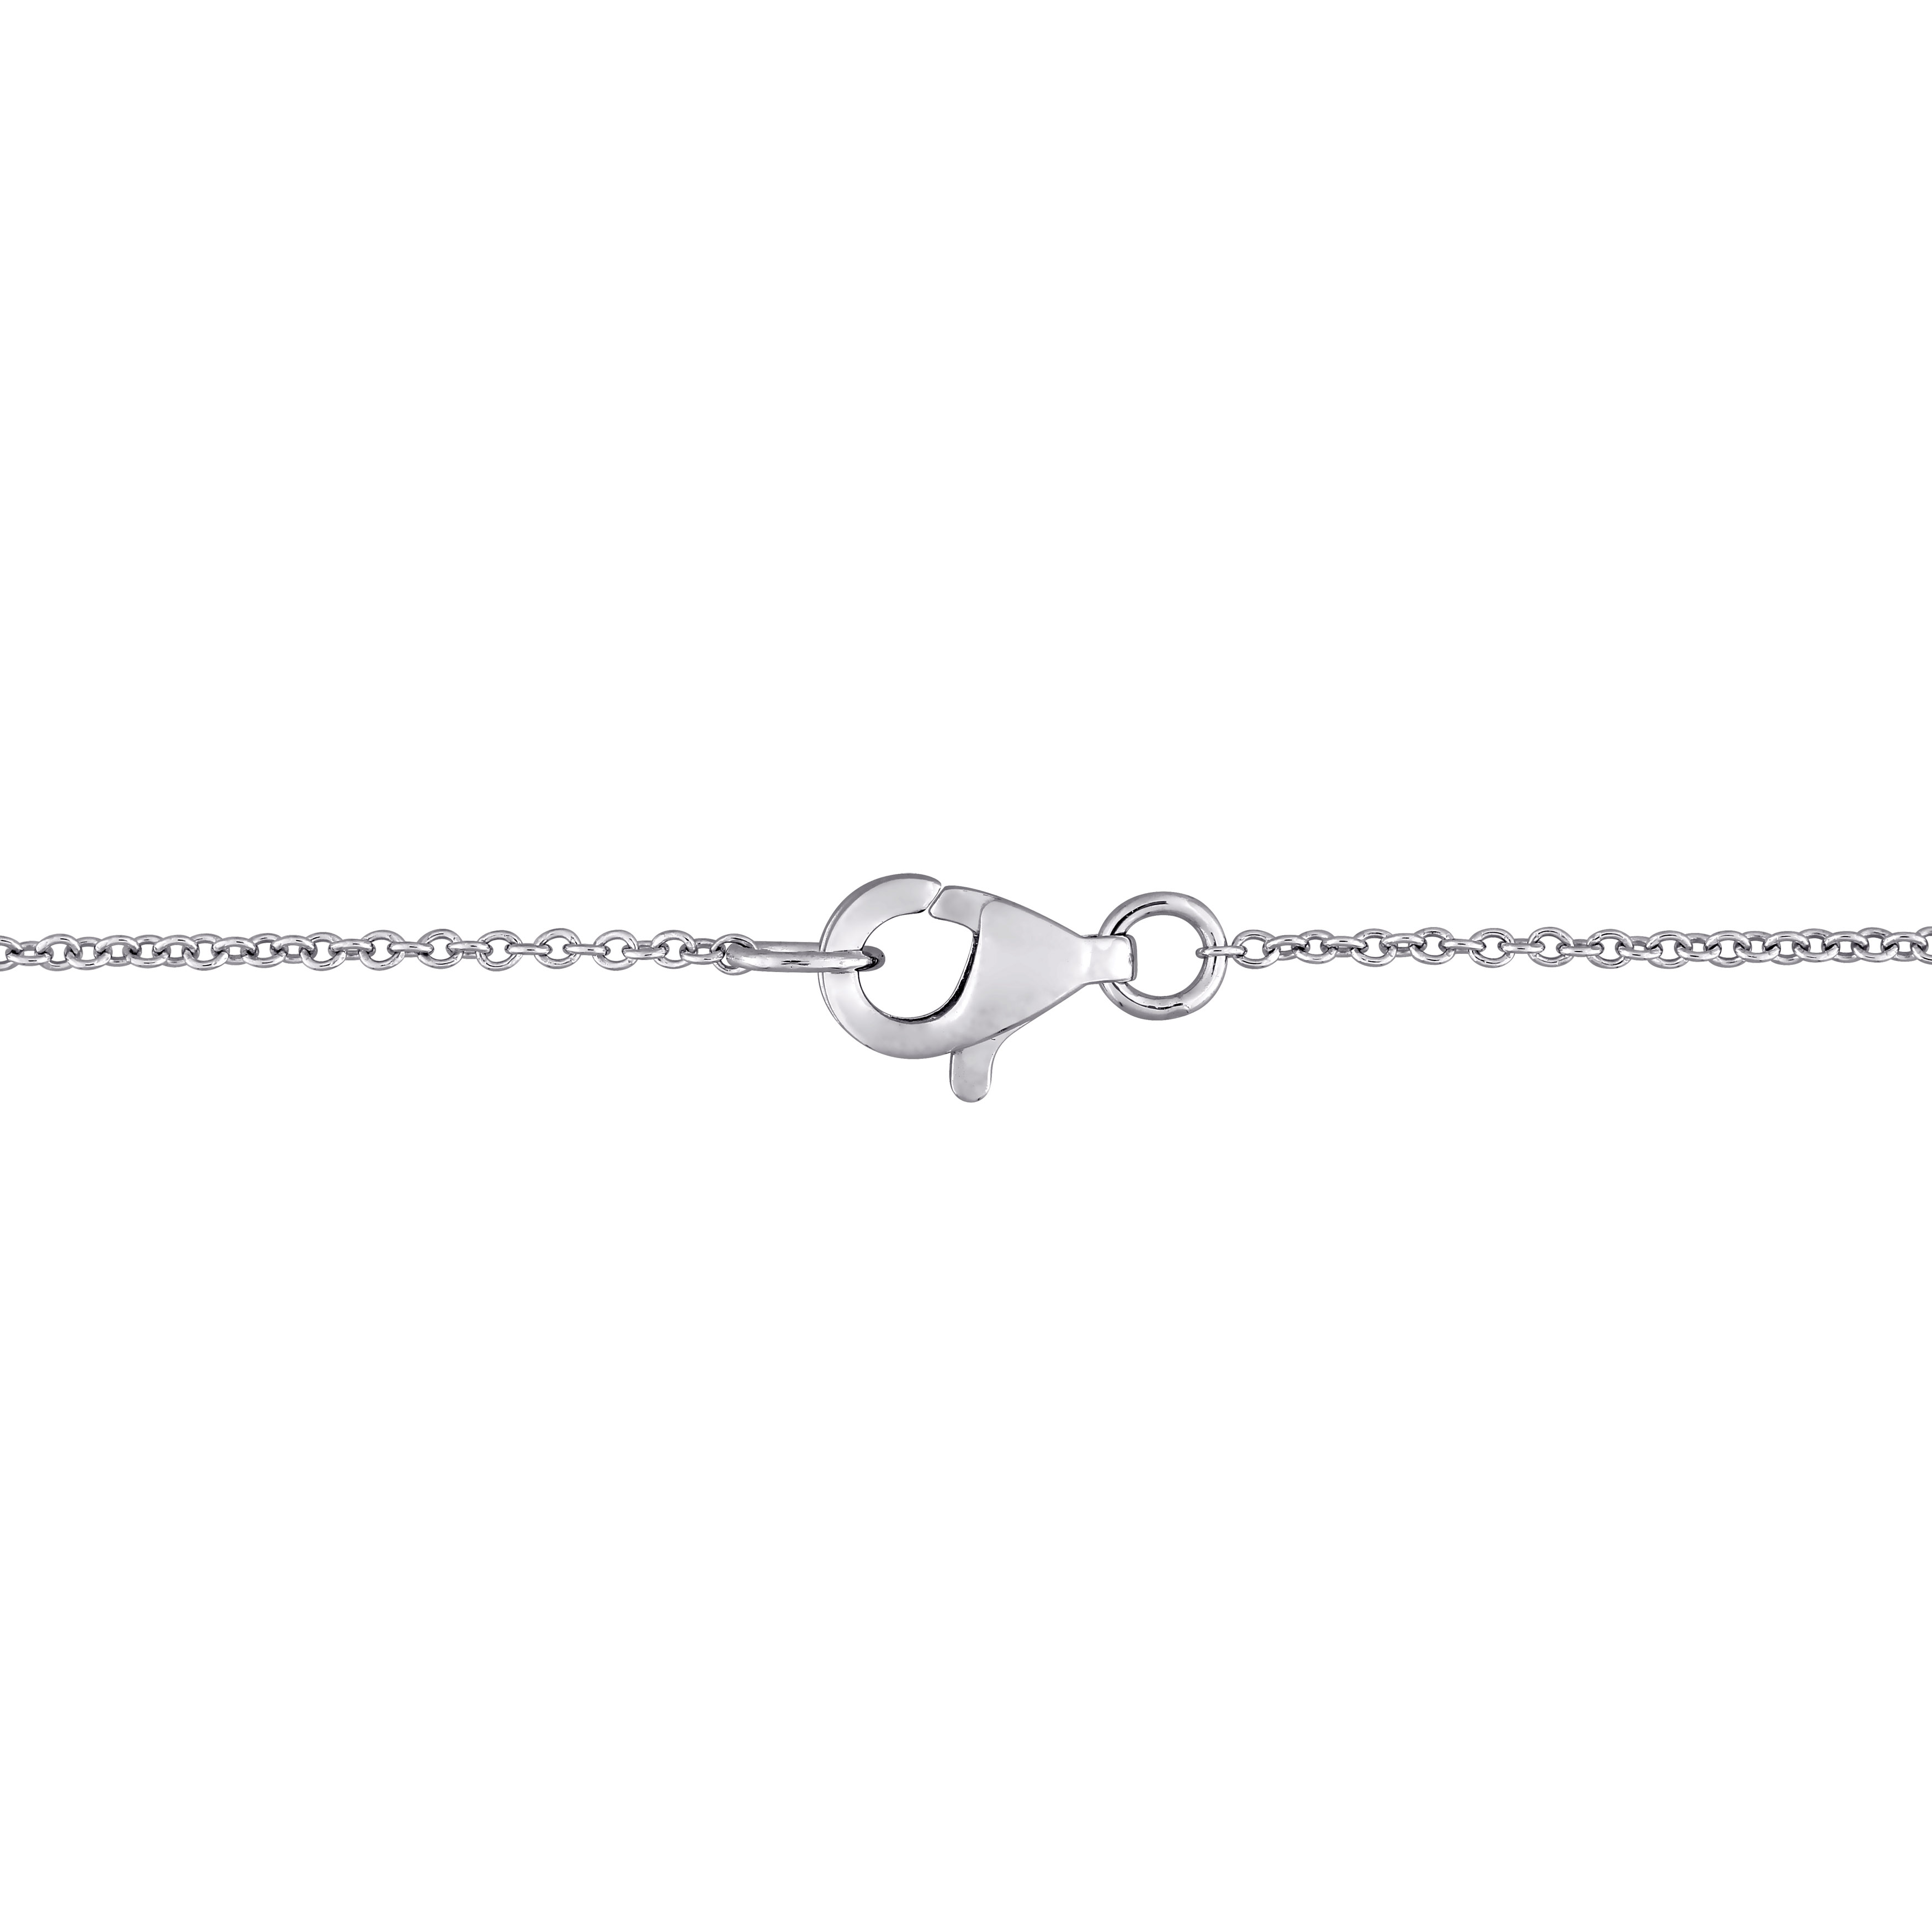 1 1/3 CT DEW Created Moissanite Station Necklace in 10k White Gold - 18 in.